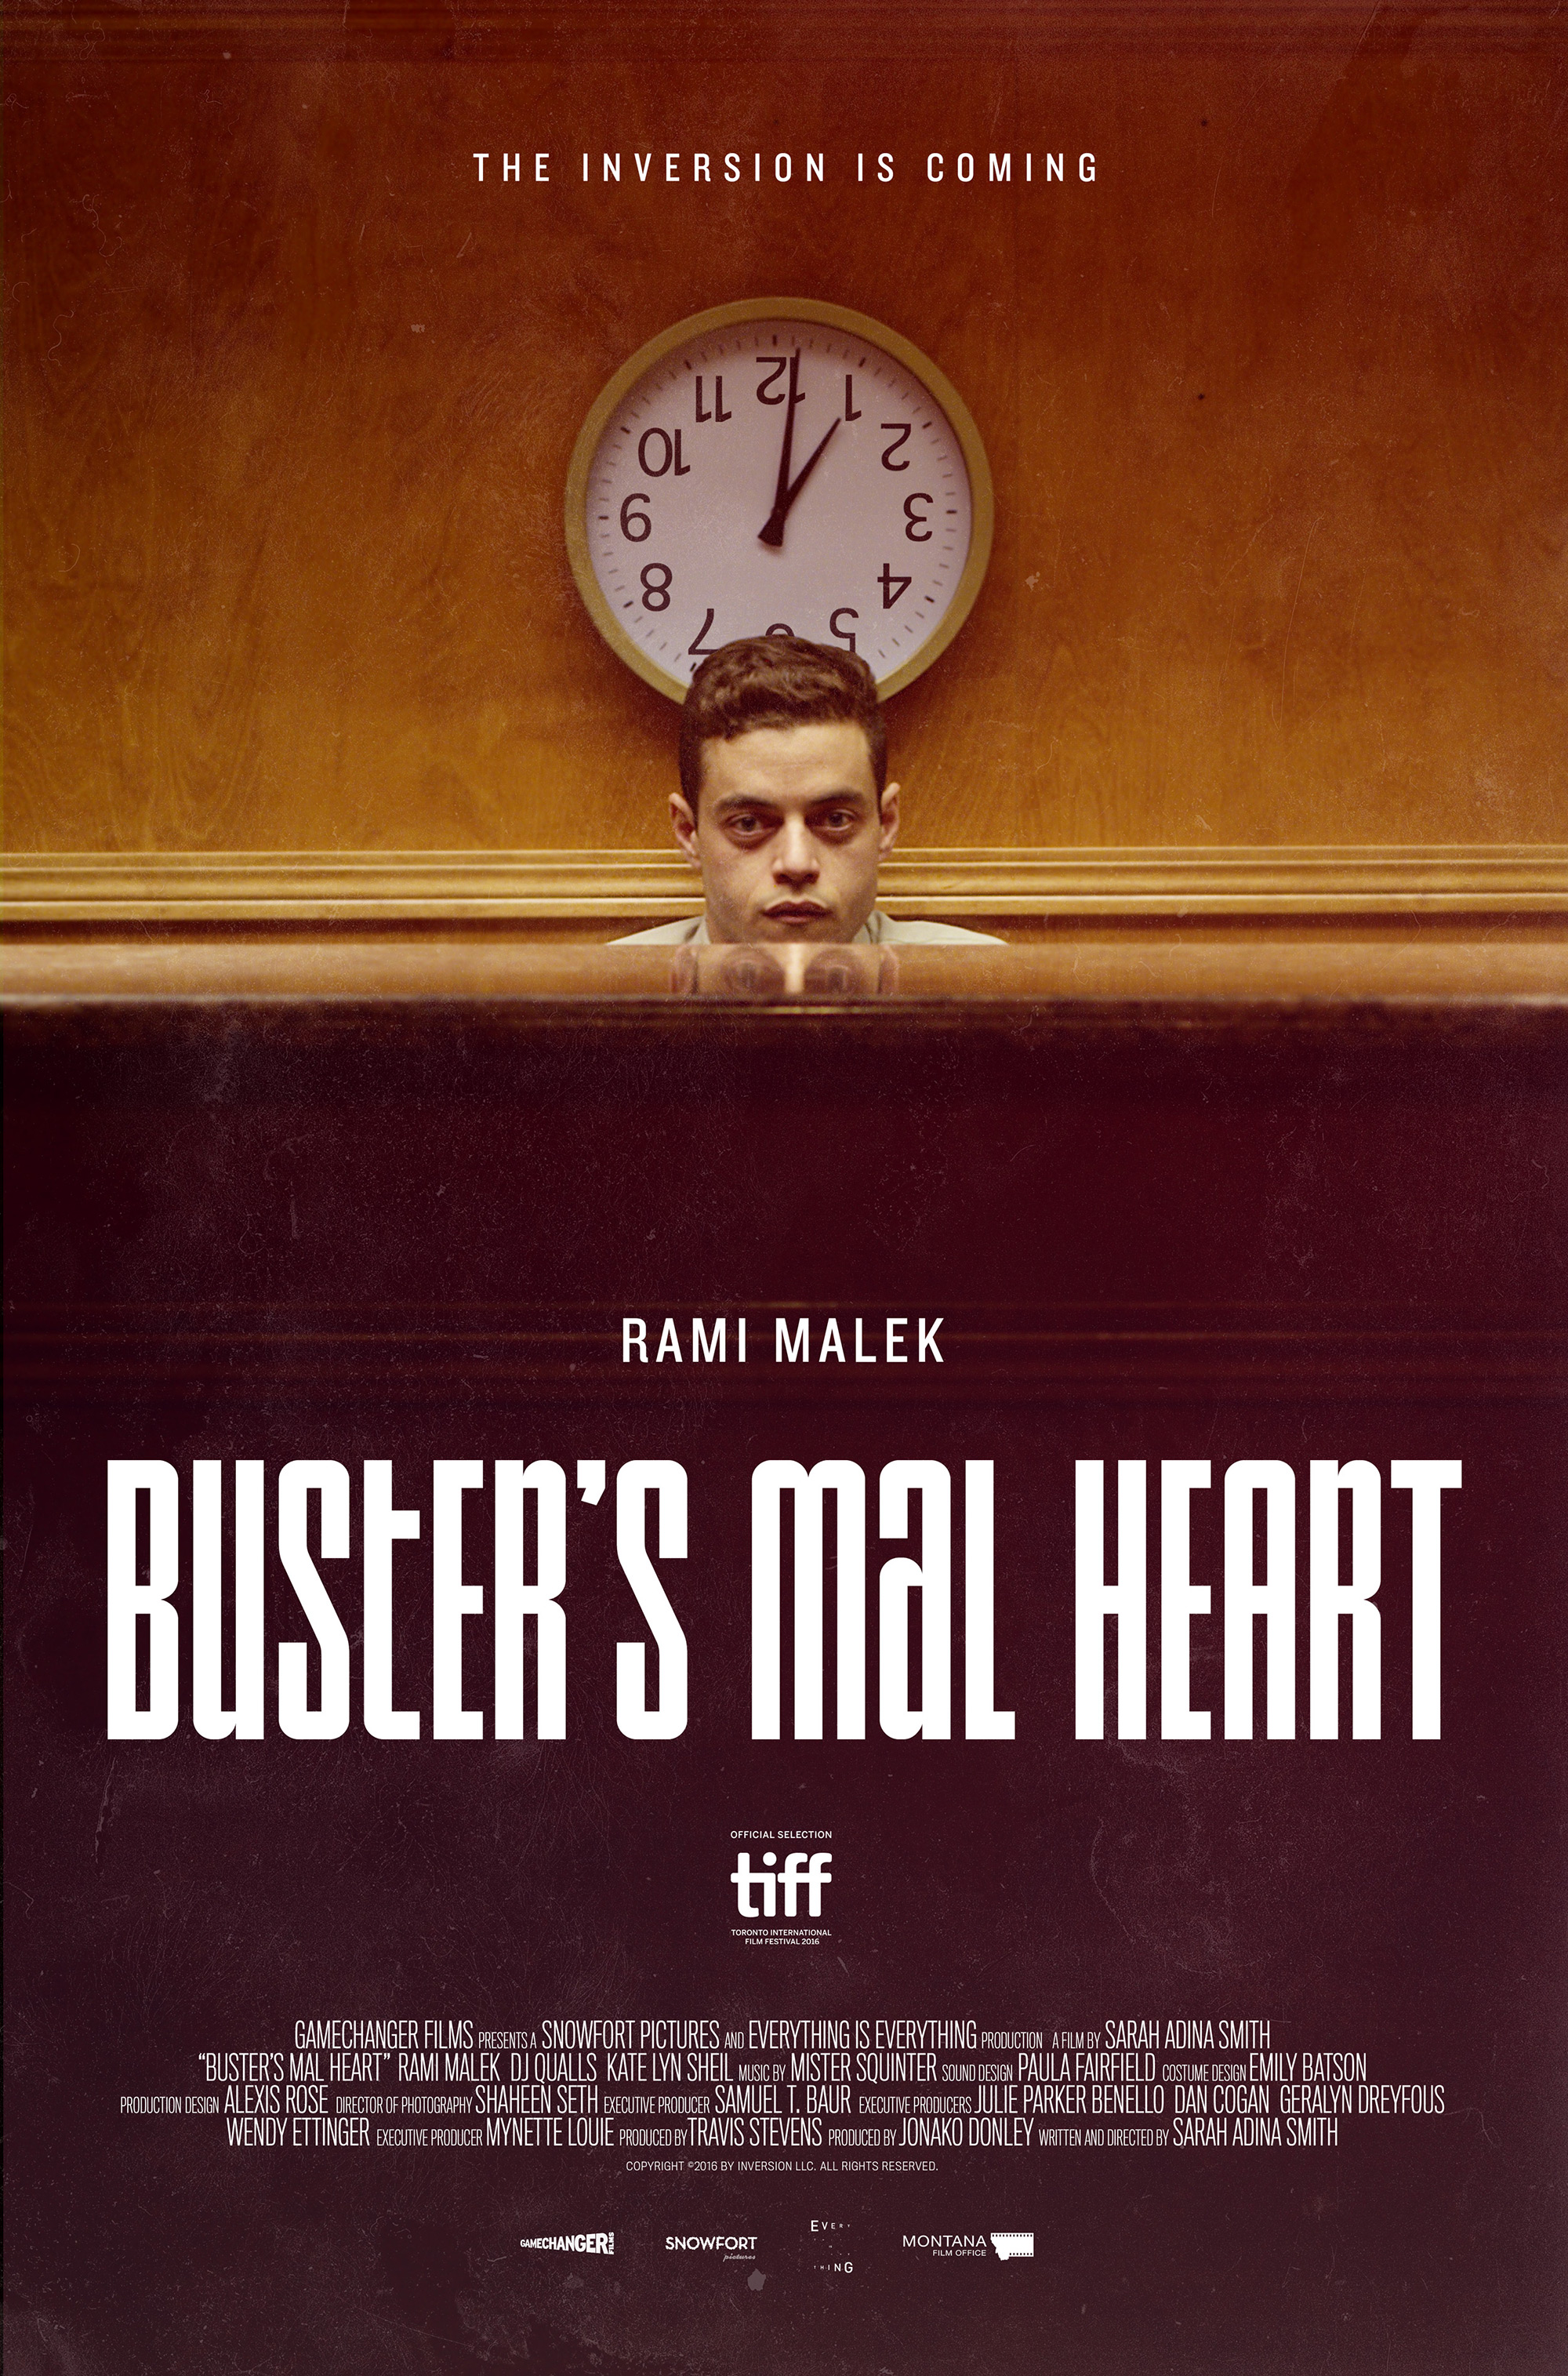 Someone Please Explain the Movie Buster's Mal Heart - Taylor